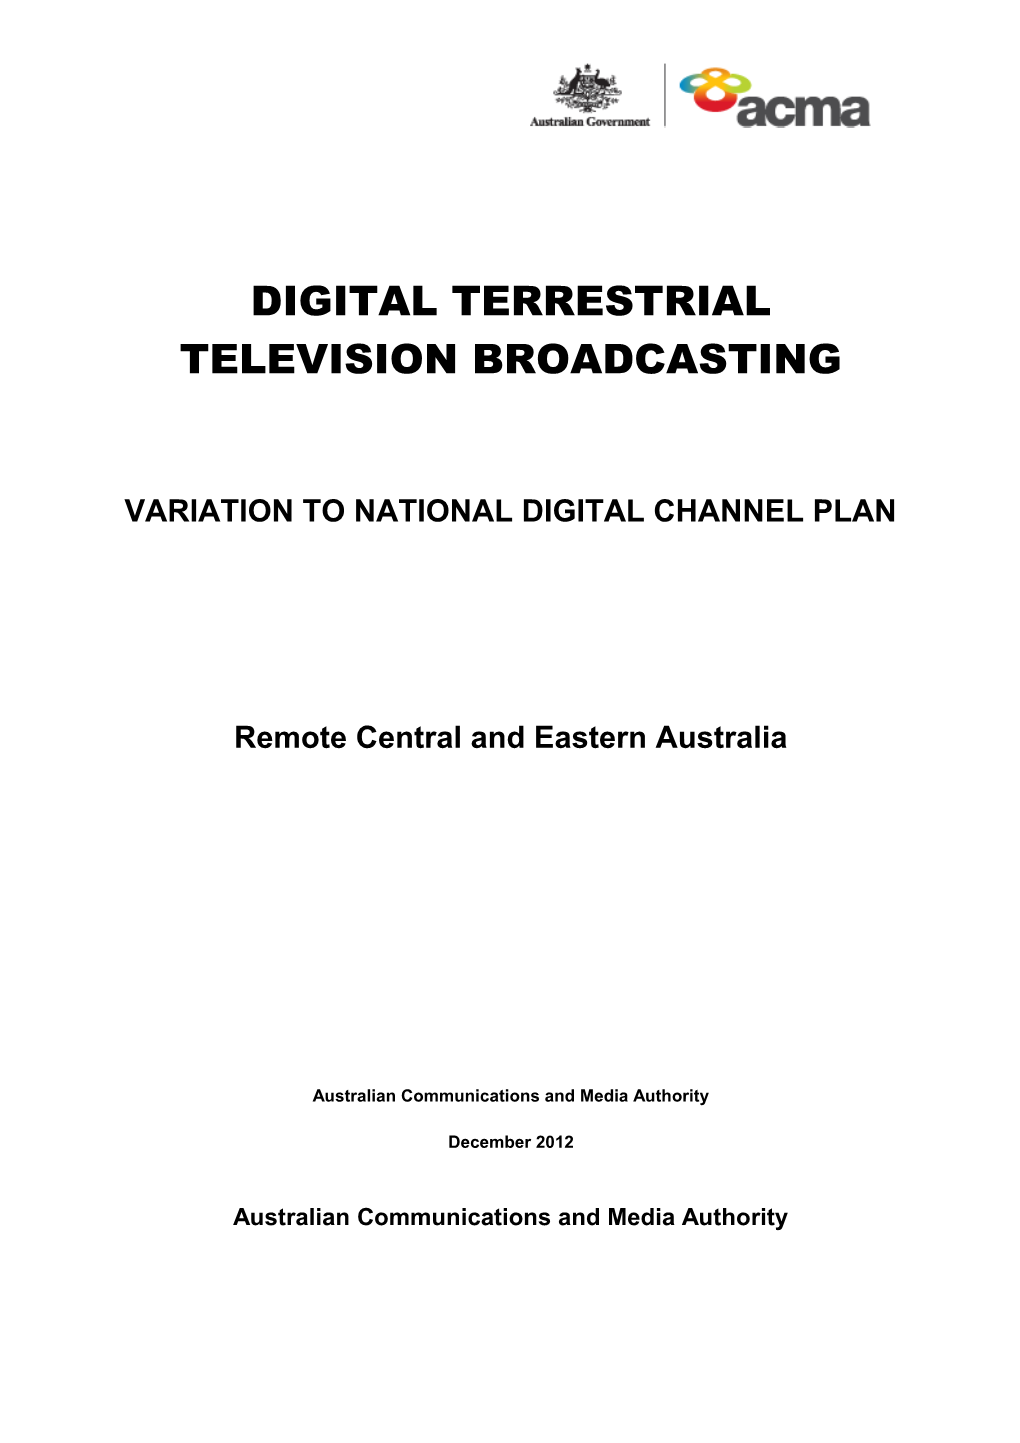 DTTB - Variation to National Digital Channel Plan - Remote Central & Eastern Australia